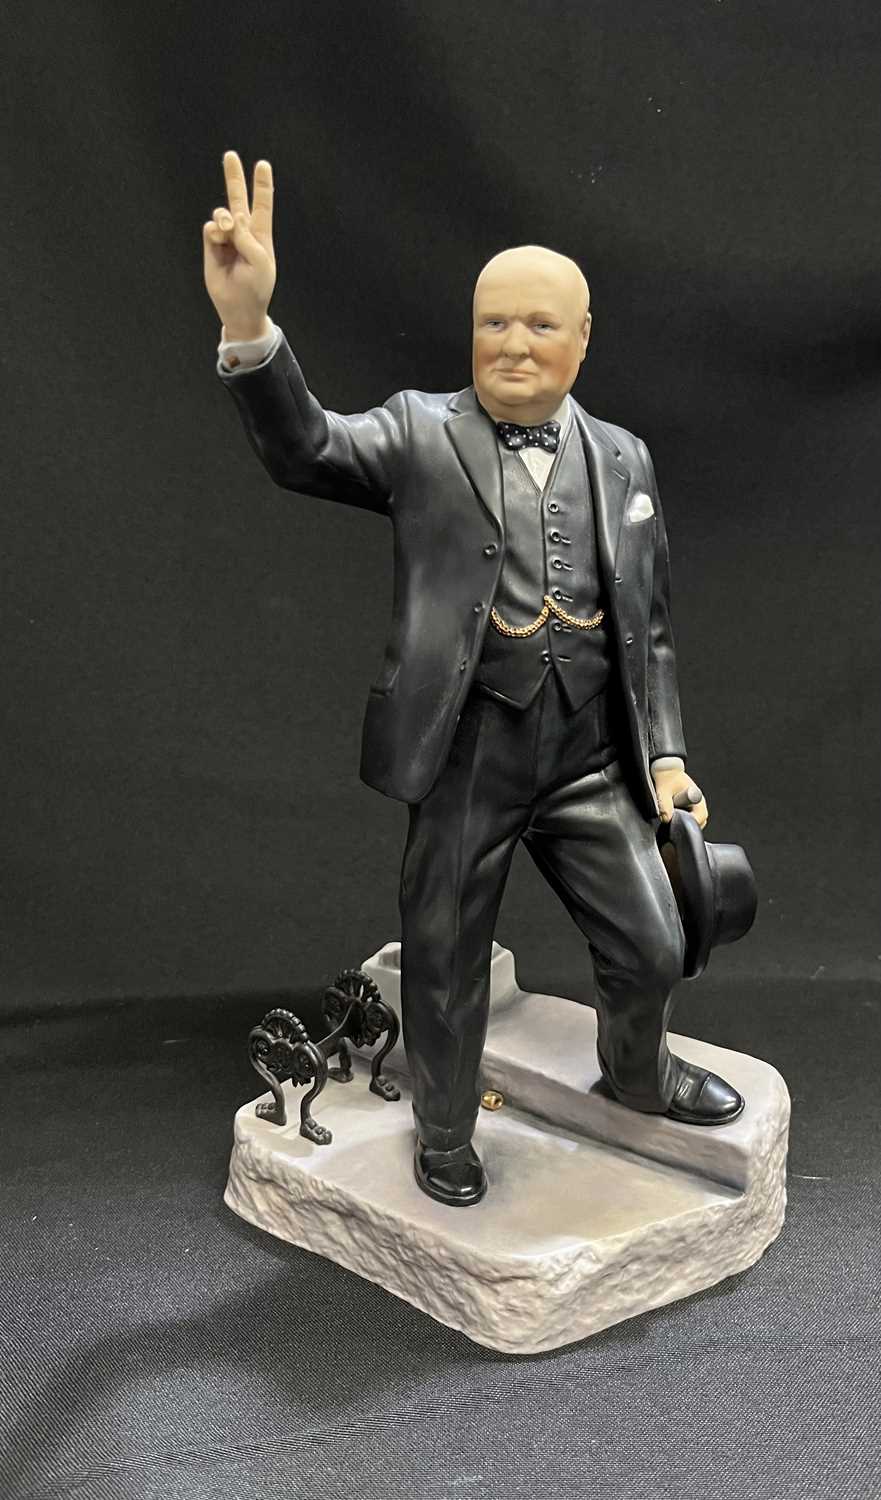 A PORCELAIN FIGURE OF WINSTON CHURCHILL, BY ASHMOR WORCESTER - Image 2 of 4